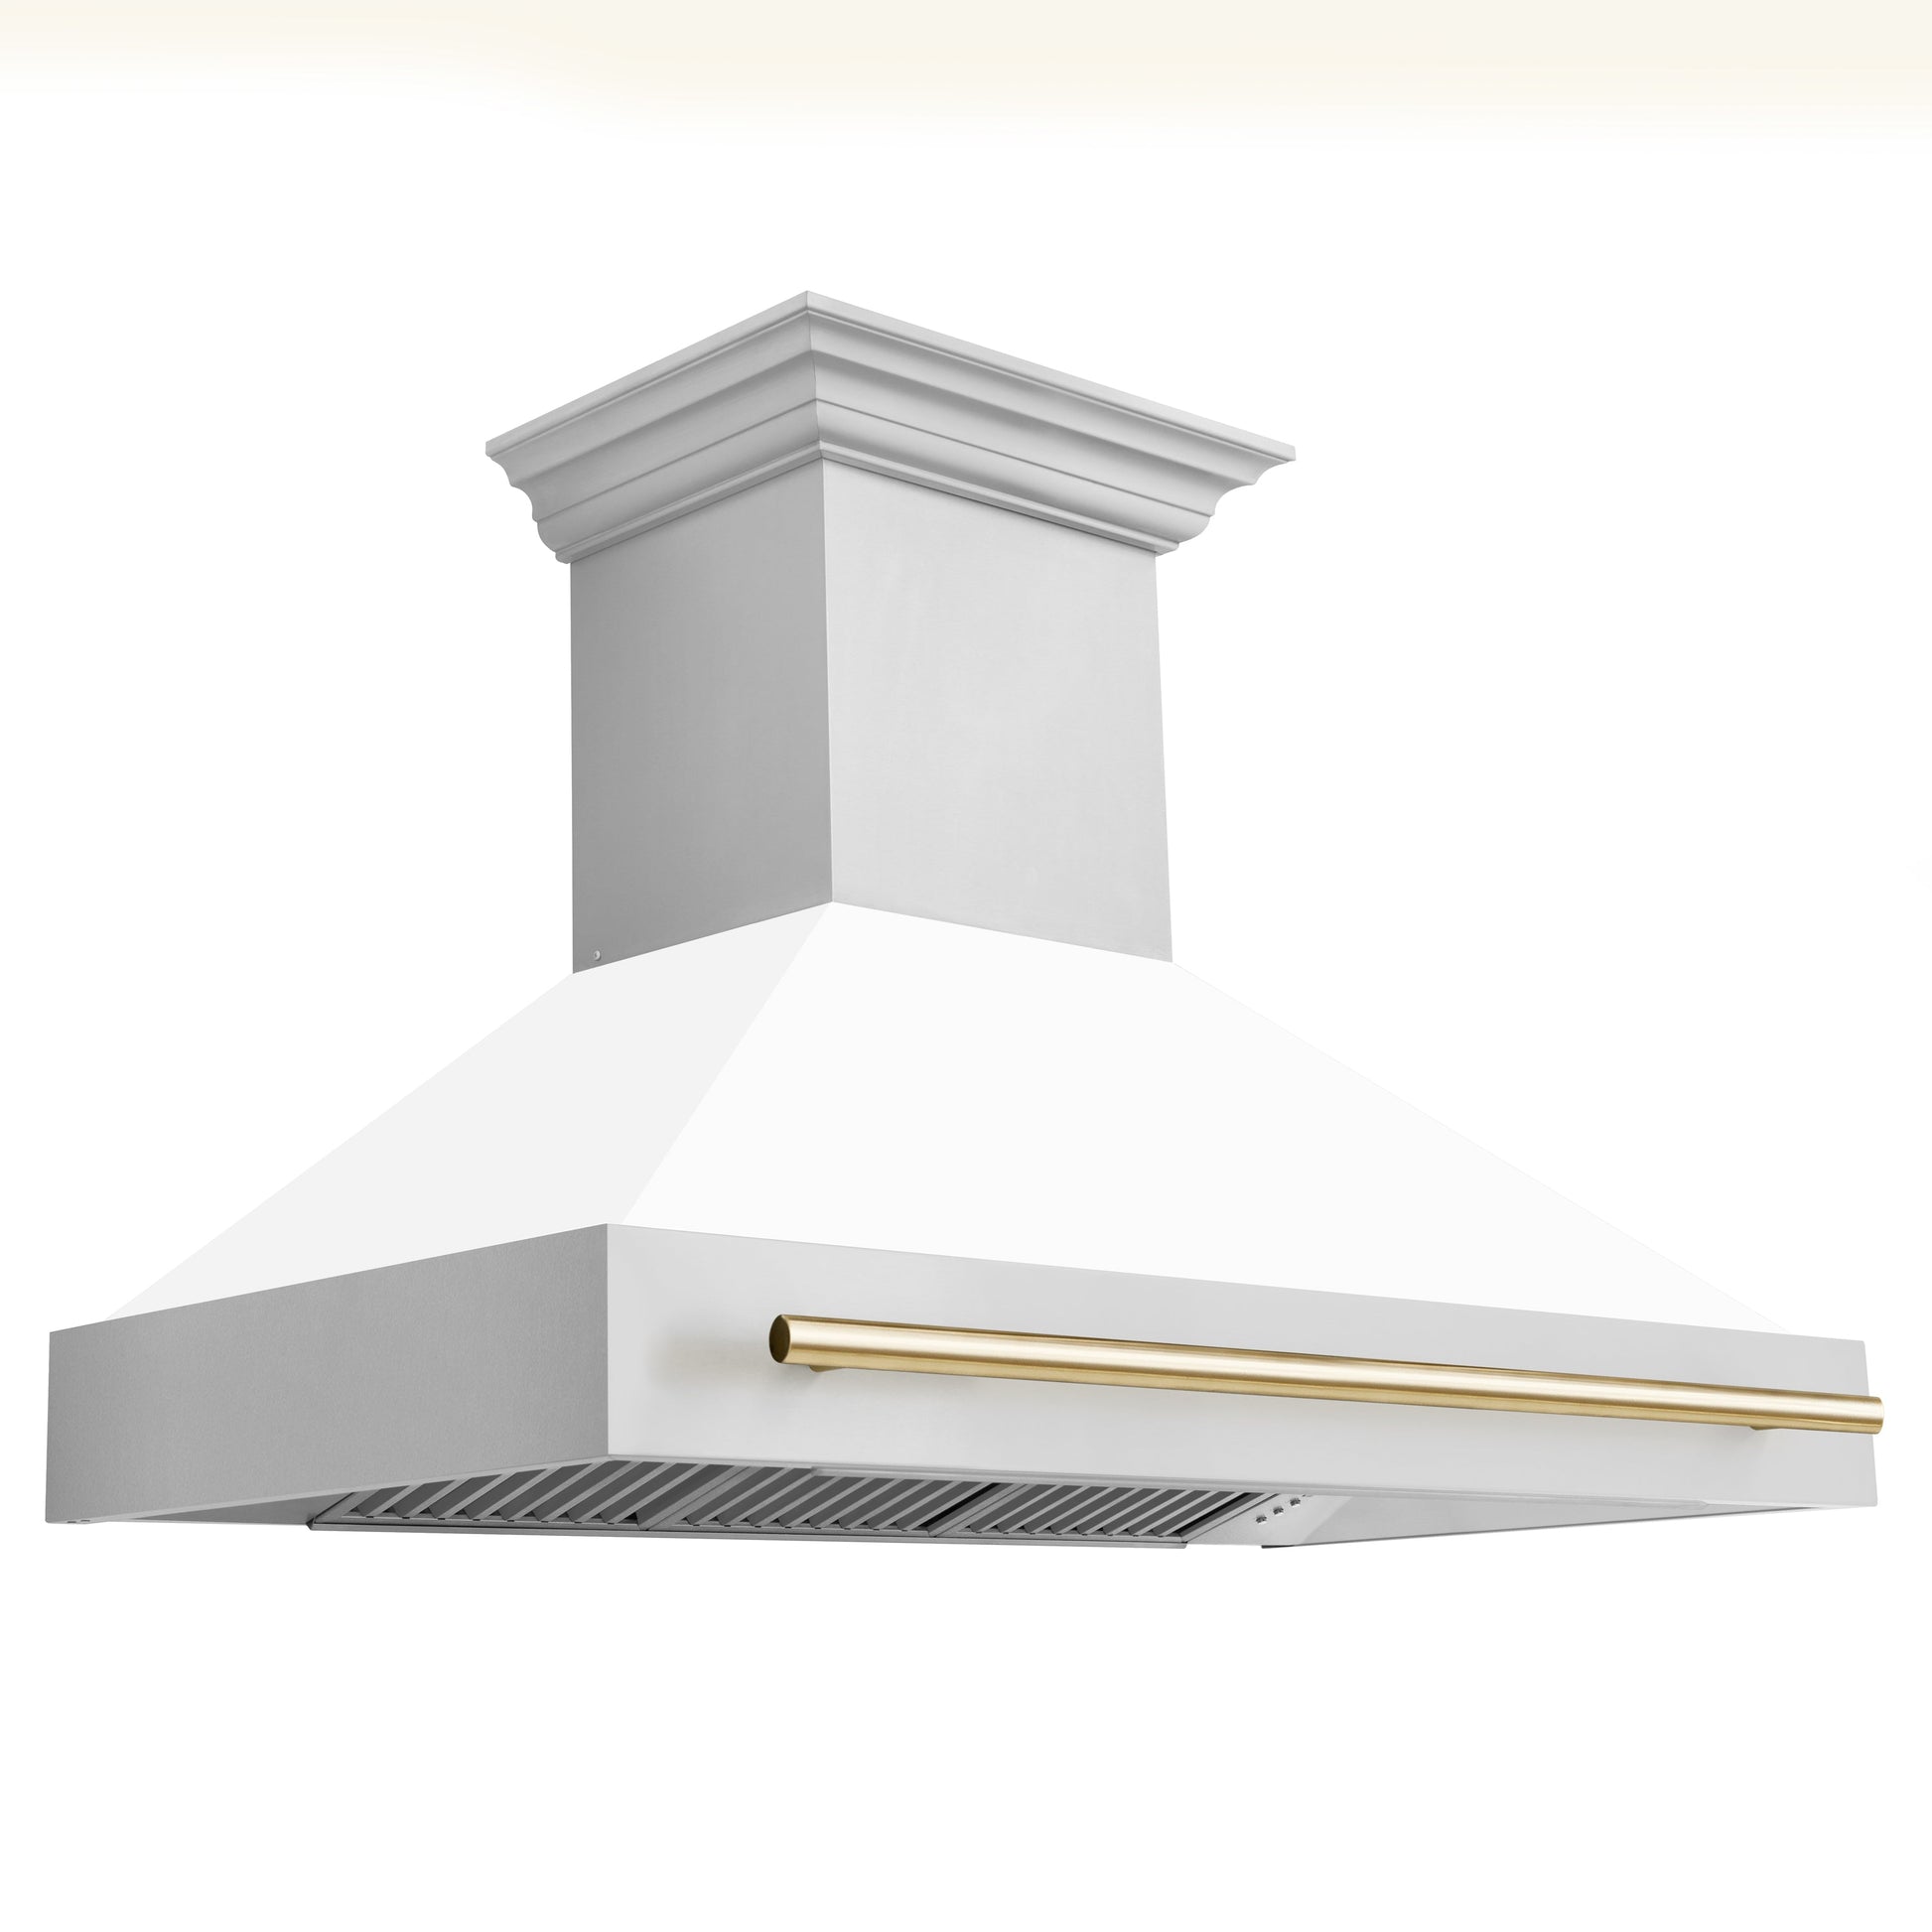 ZLINE 2-Appliance 48" Autograph Edition Kitchen Package with Stainless Steel Dual Fuel Range with Matte White Door and Range Hood with Polished Gold Accents